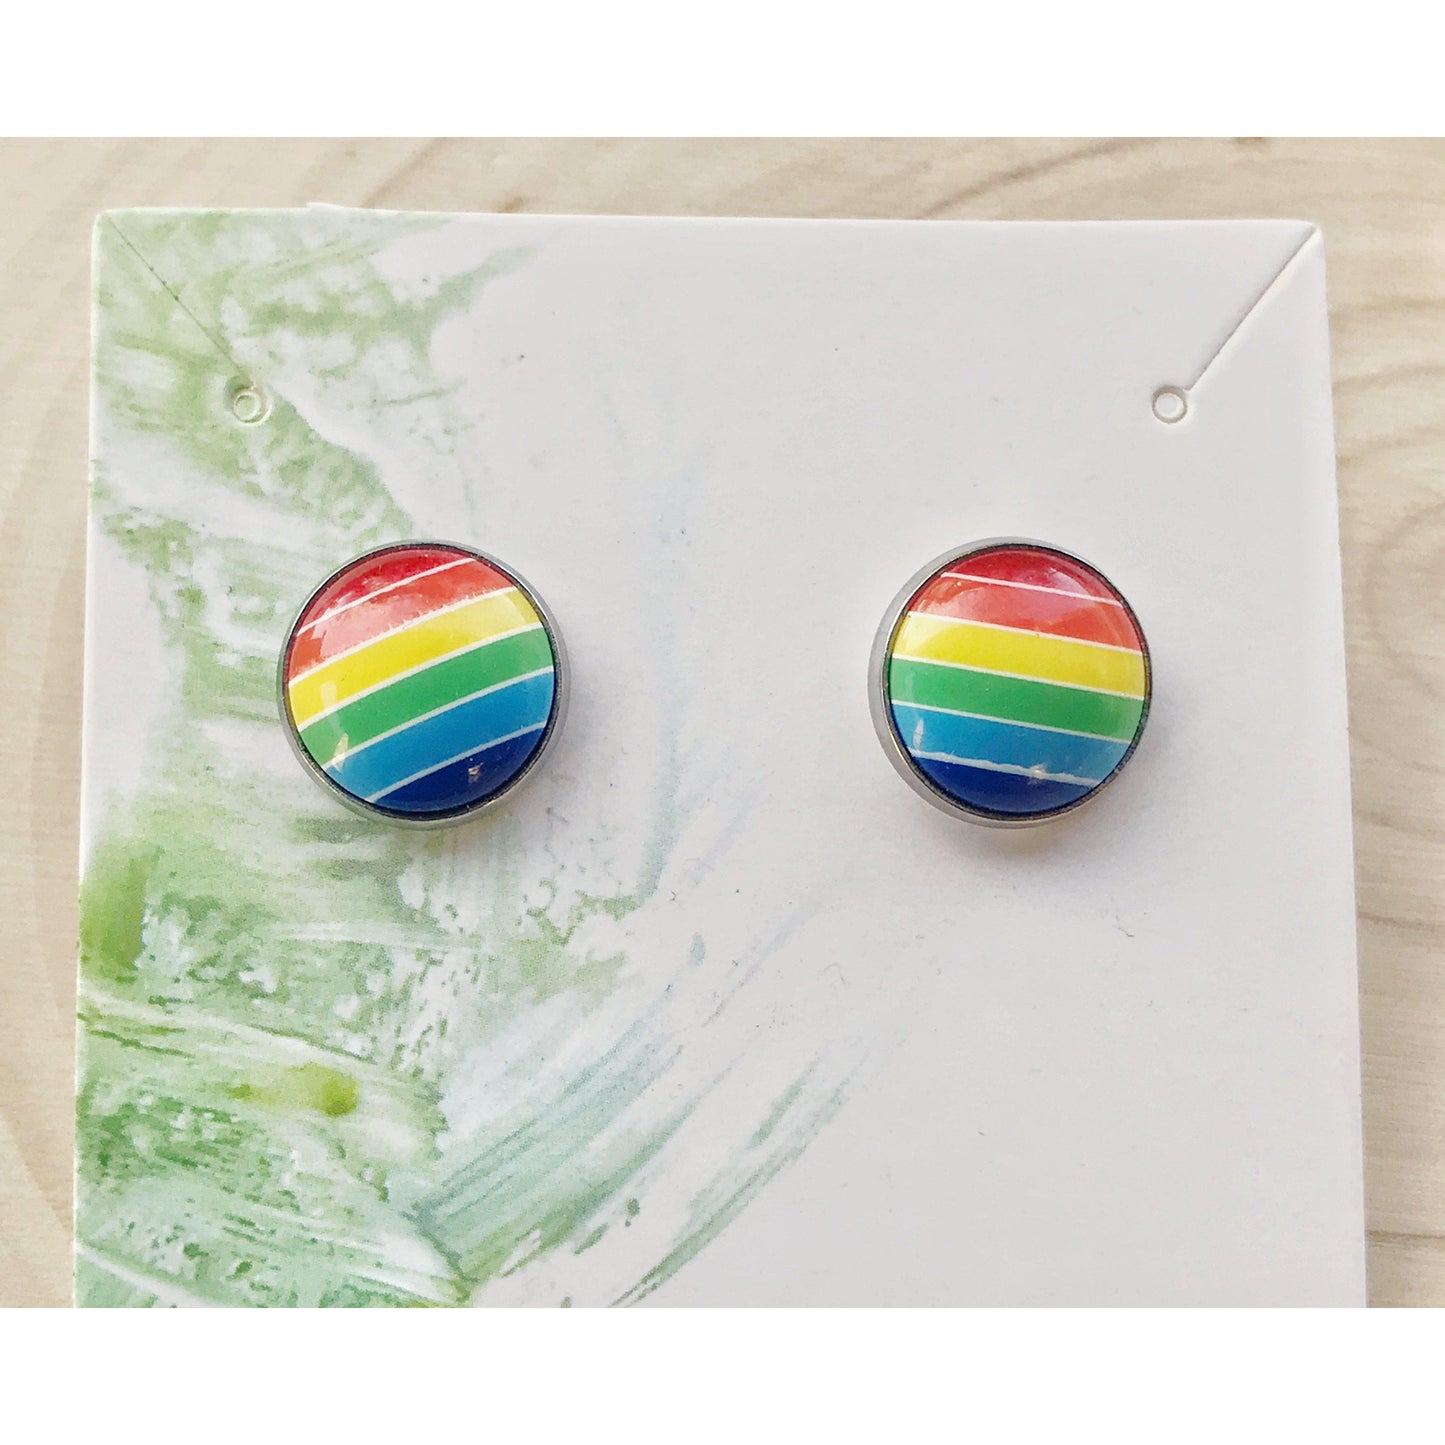 Rainbow Striped Silver Stud Earrings: Colorful and Chic Accessories for Every Day